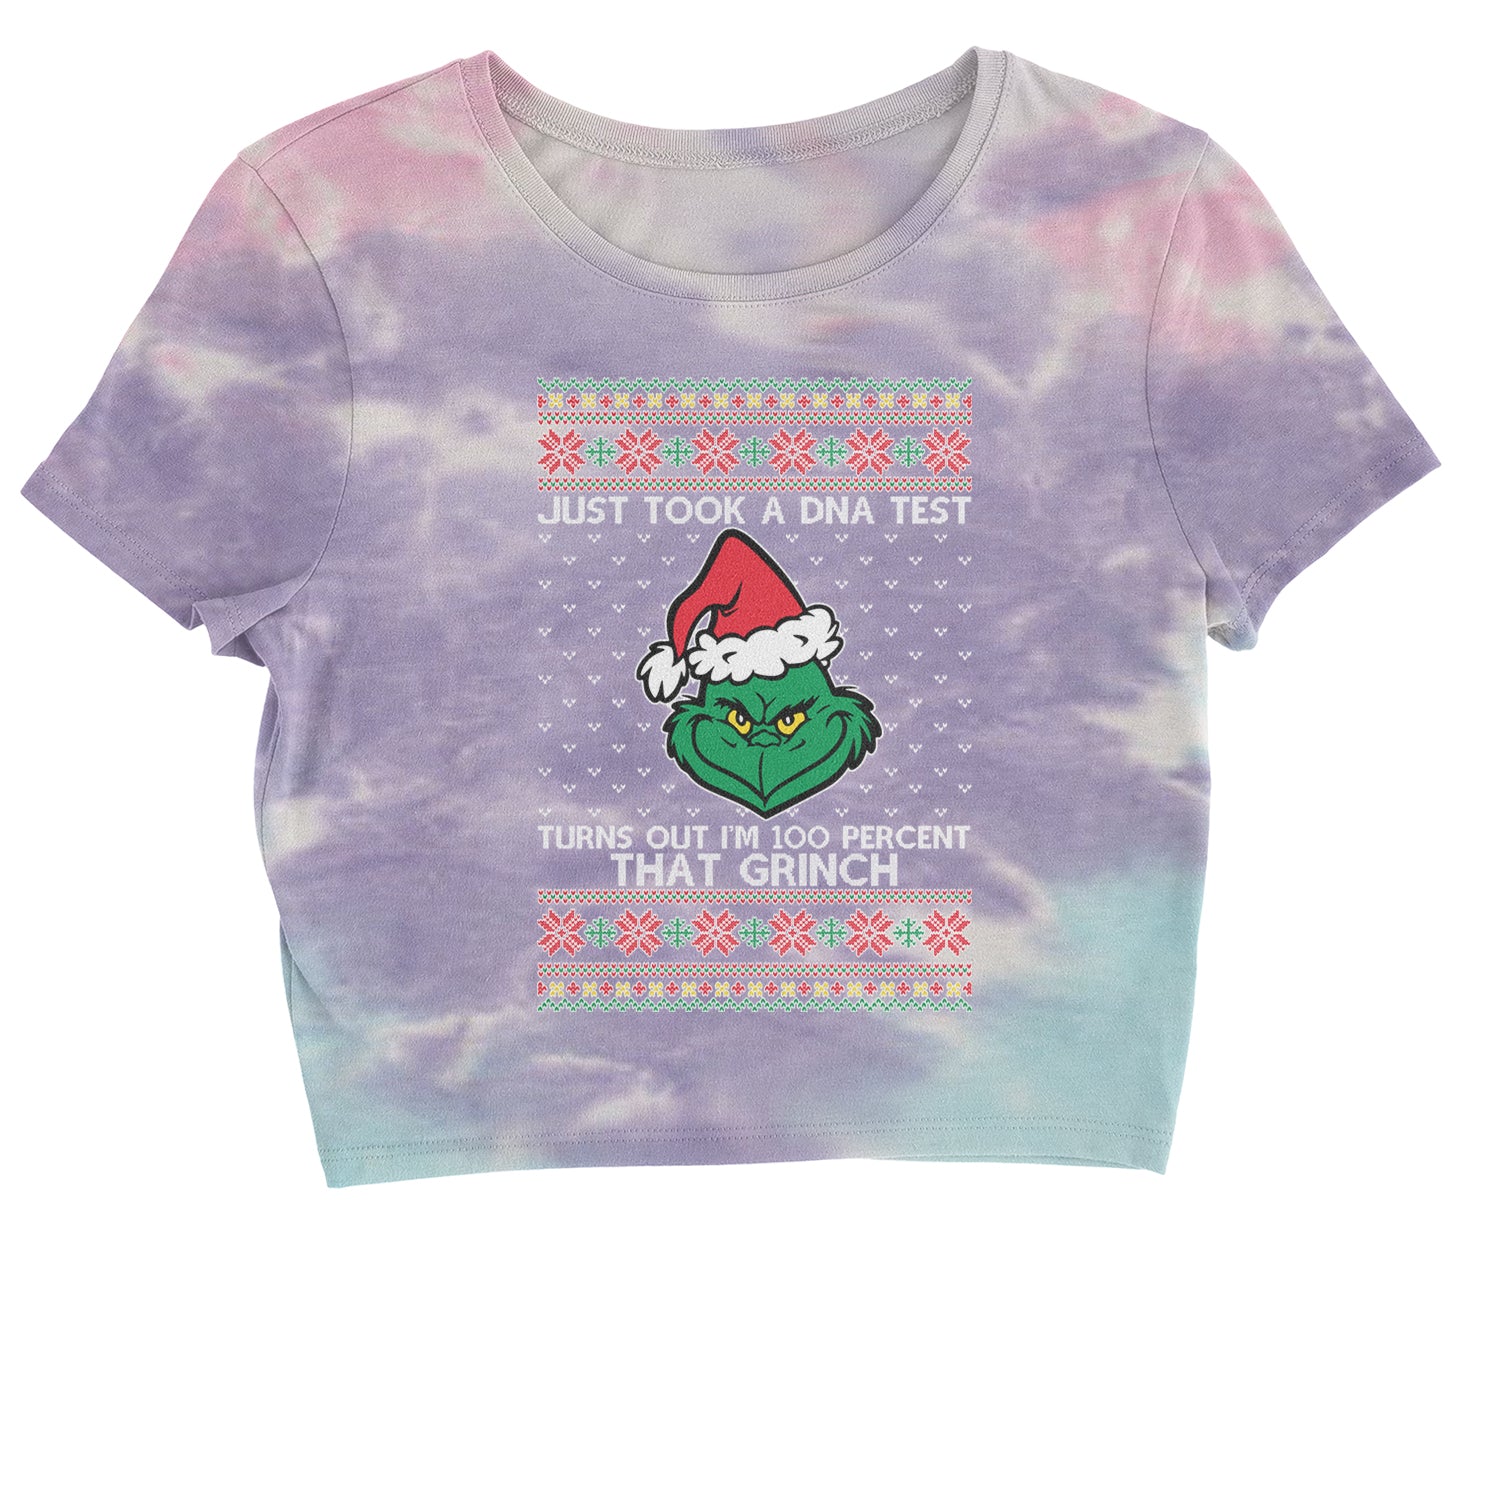 One Hundred Percent That Grinch Cropped T-Shirt christmas, grinch, sweater, sweatshirt, ugly, xmas by Expression Tees